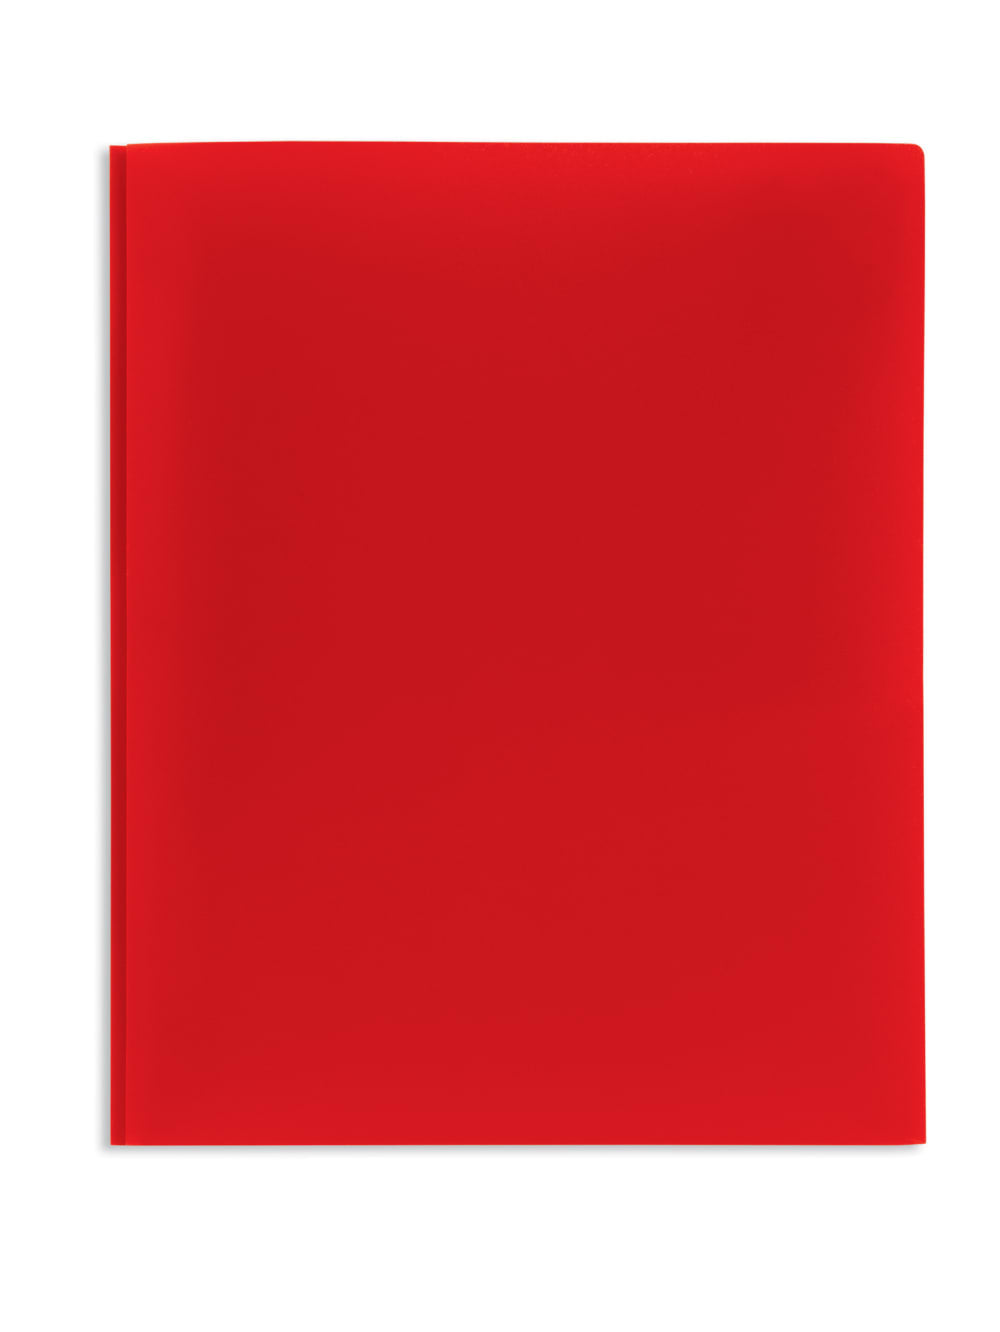 Office Depot® Brand 2-Pocket Poly Folder with Prongs, Letter Size, Red
				
		        		












	
			
				
				 
					Item # 
					
						
							
							
								468581